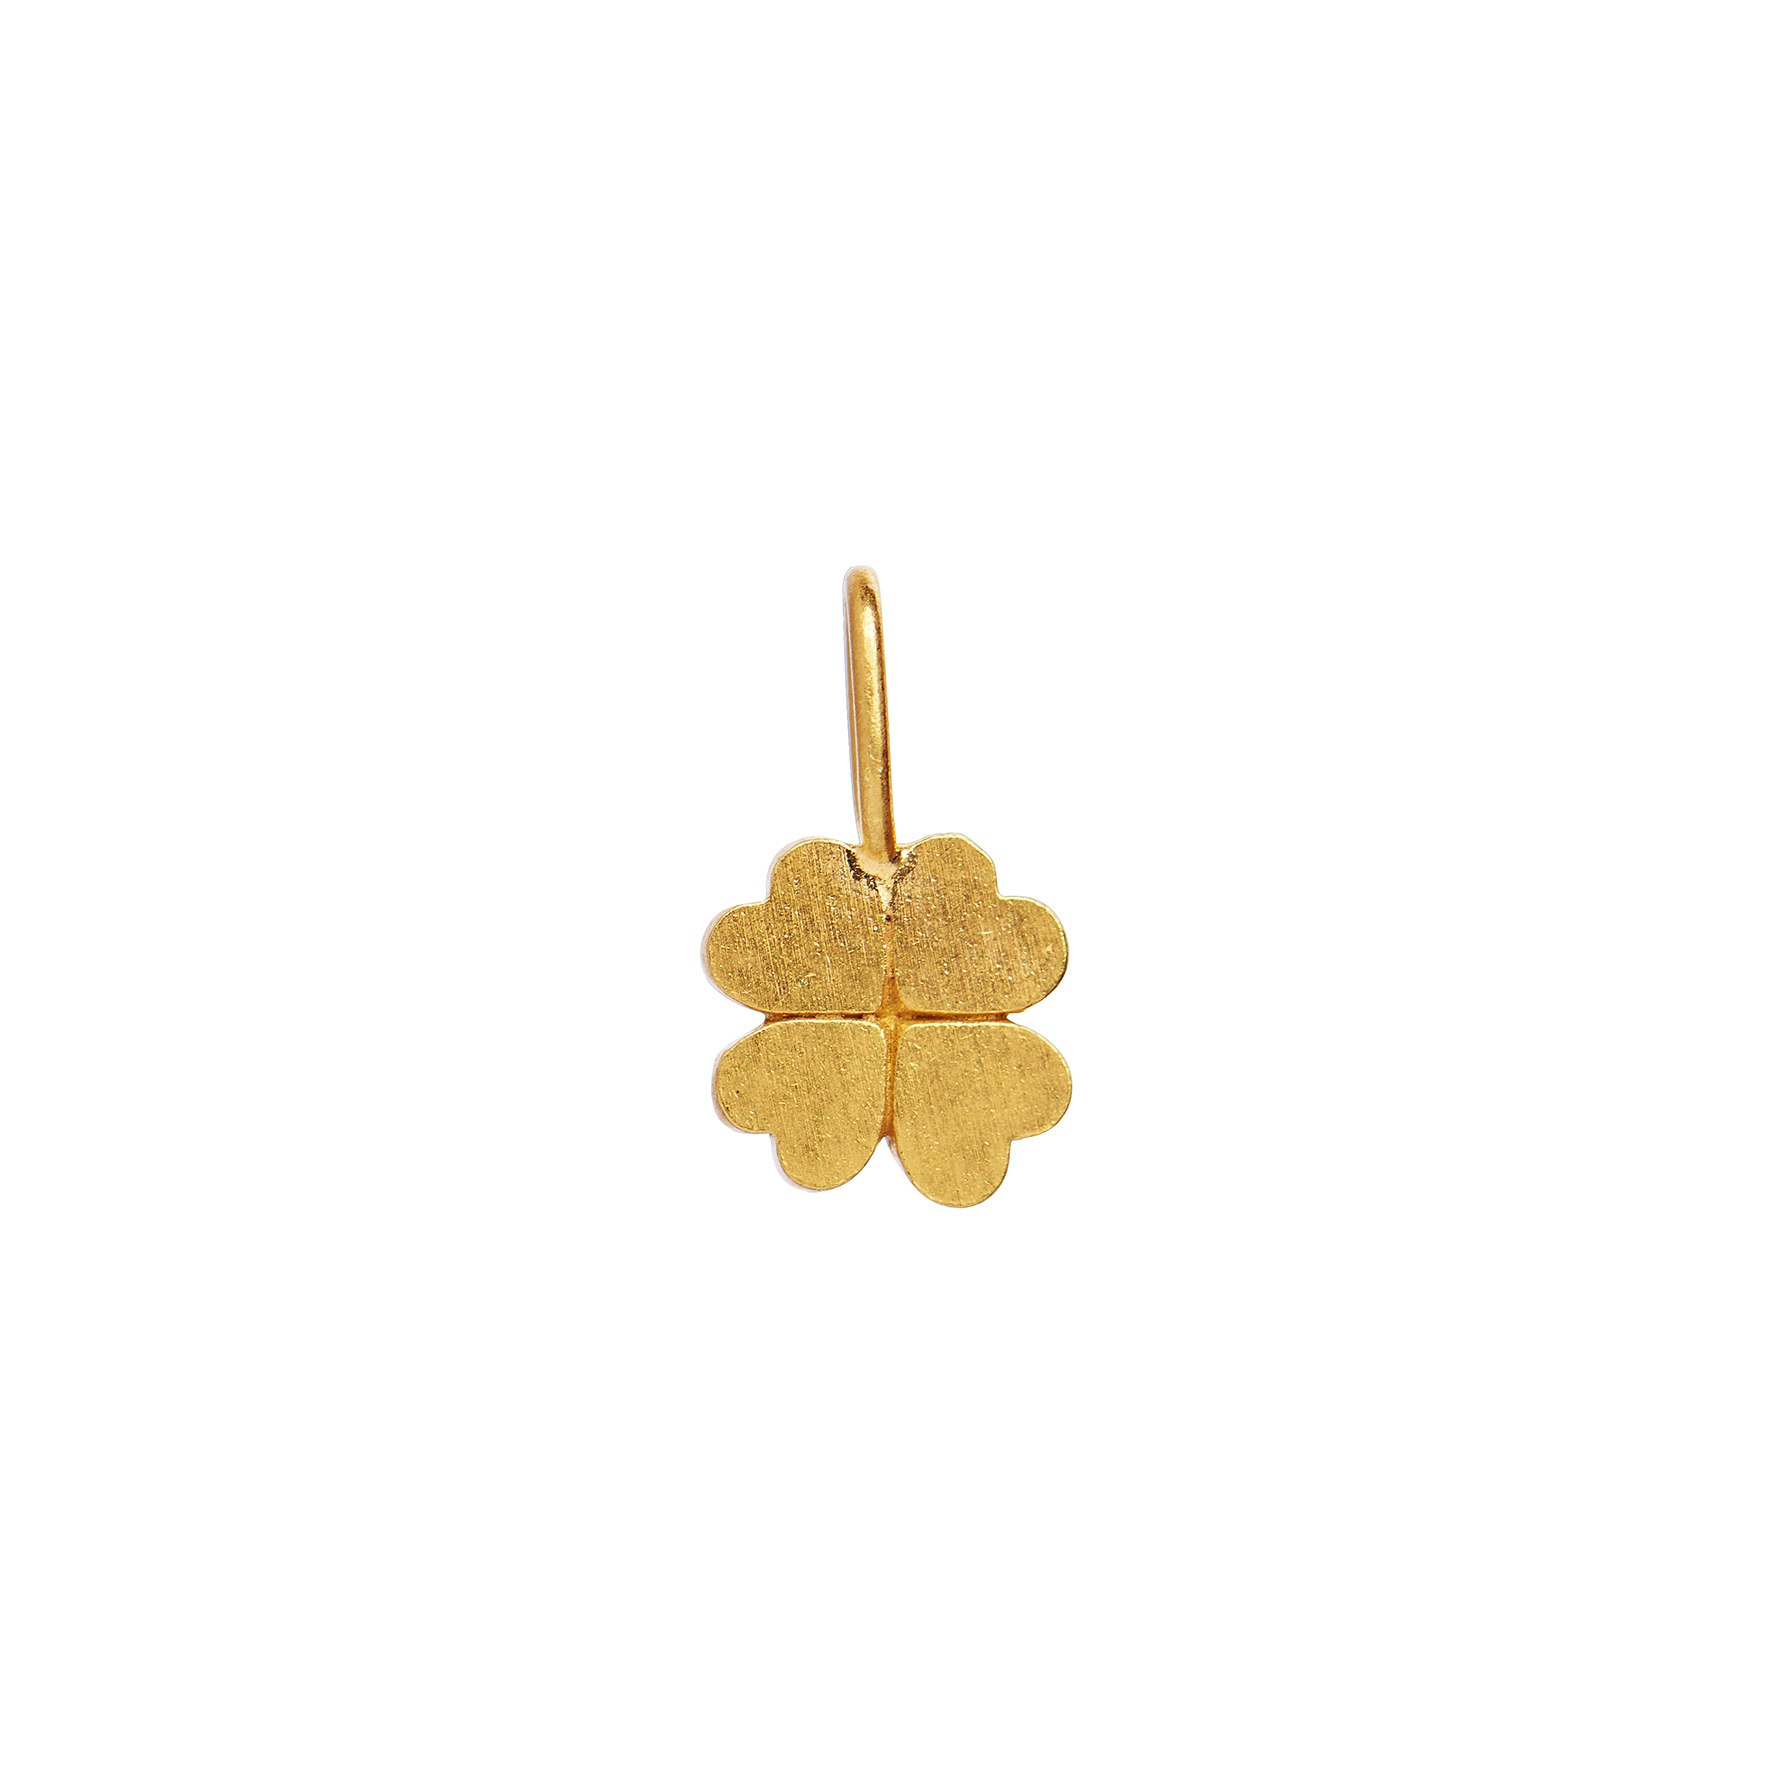 Petit Clover Charm van STINE A Jewelry in Verguld-Zilver Sterling 925